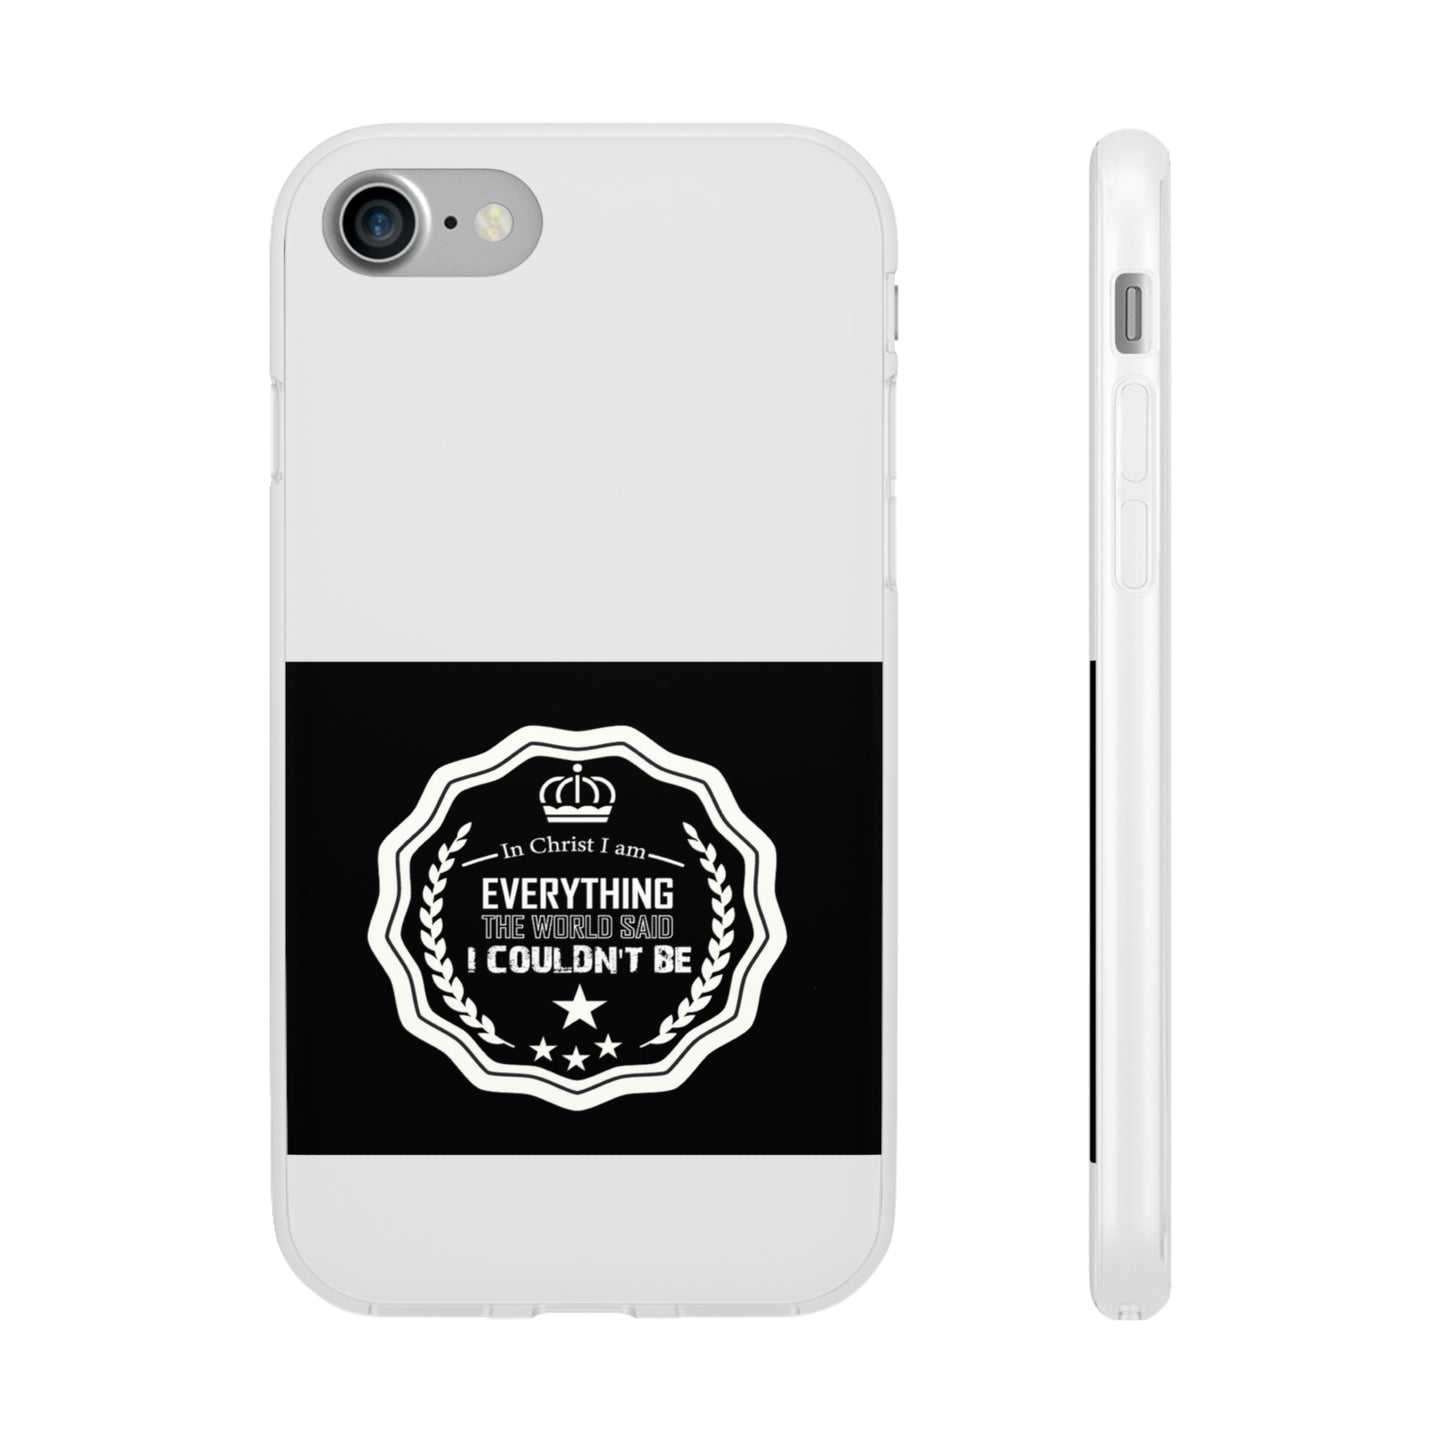 In Christ I Am Everything The World Said I Couldn't Be Flexi Phone Case